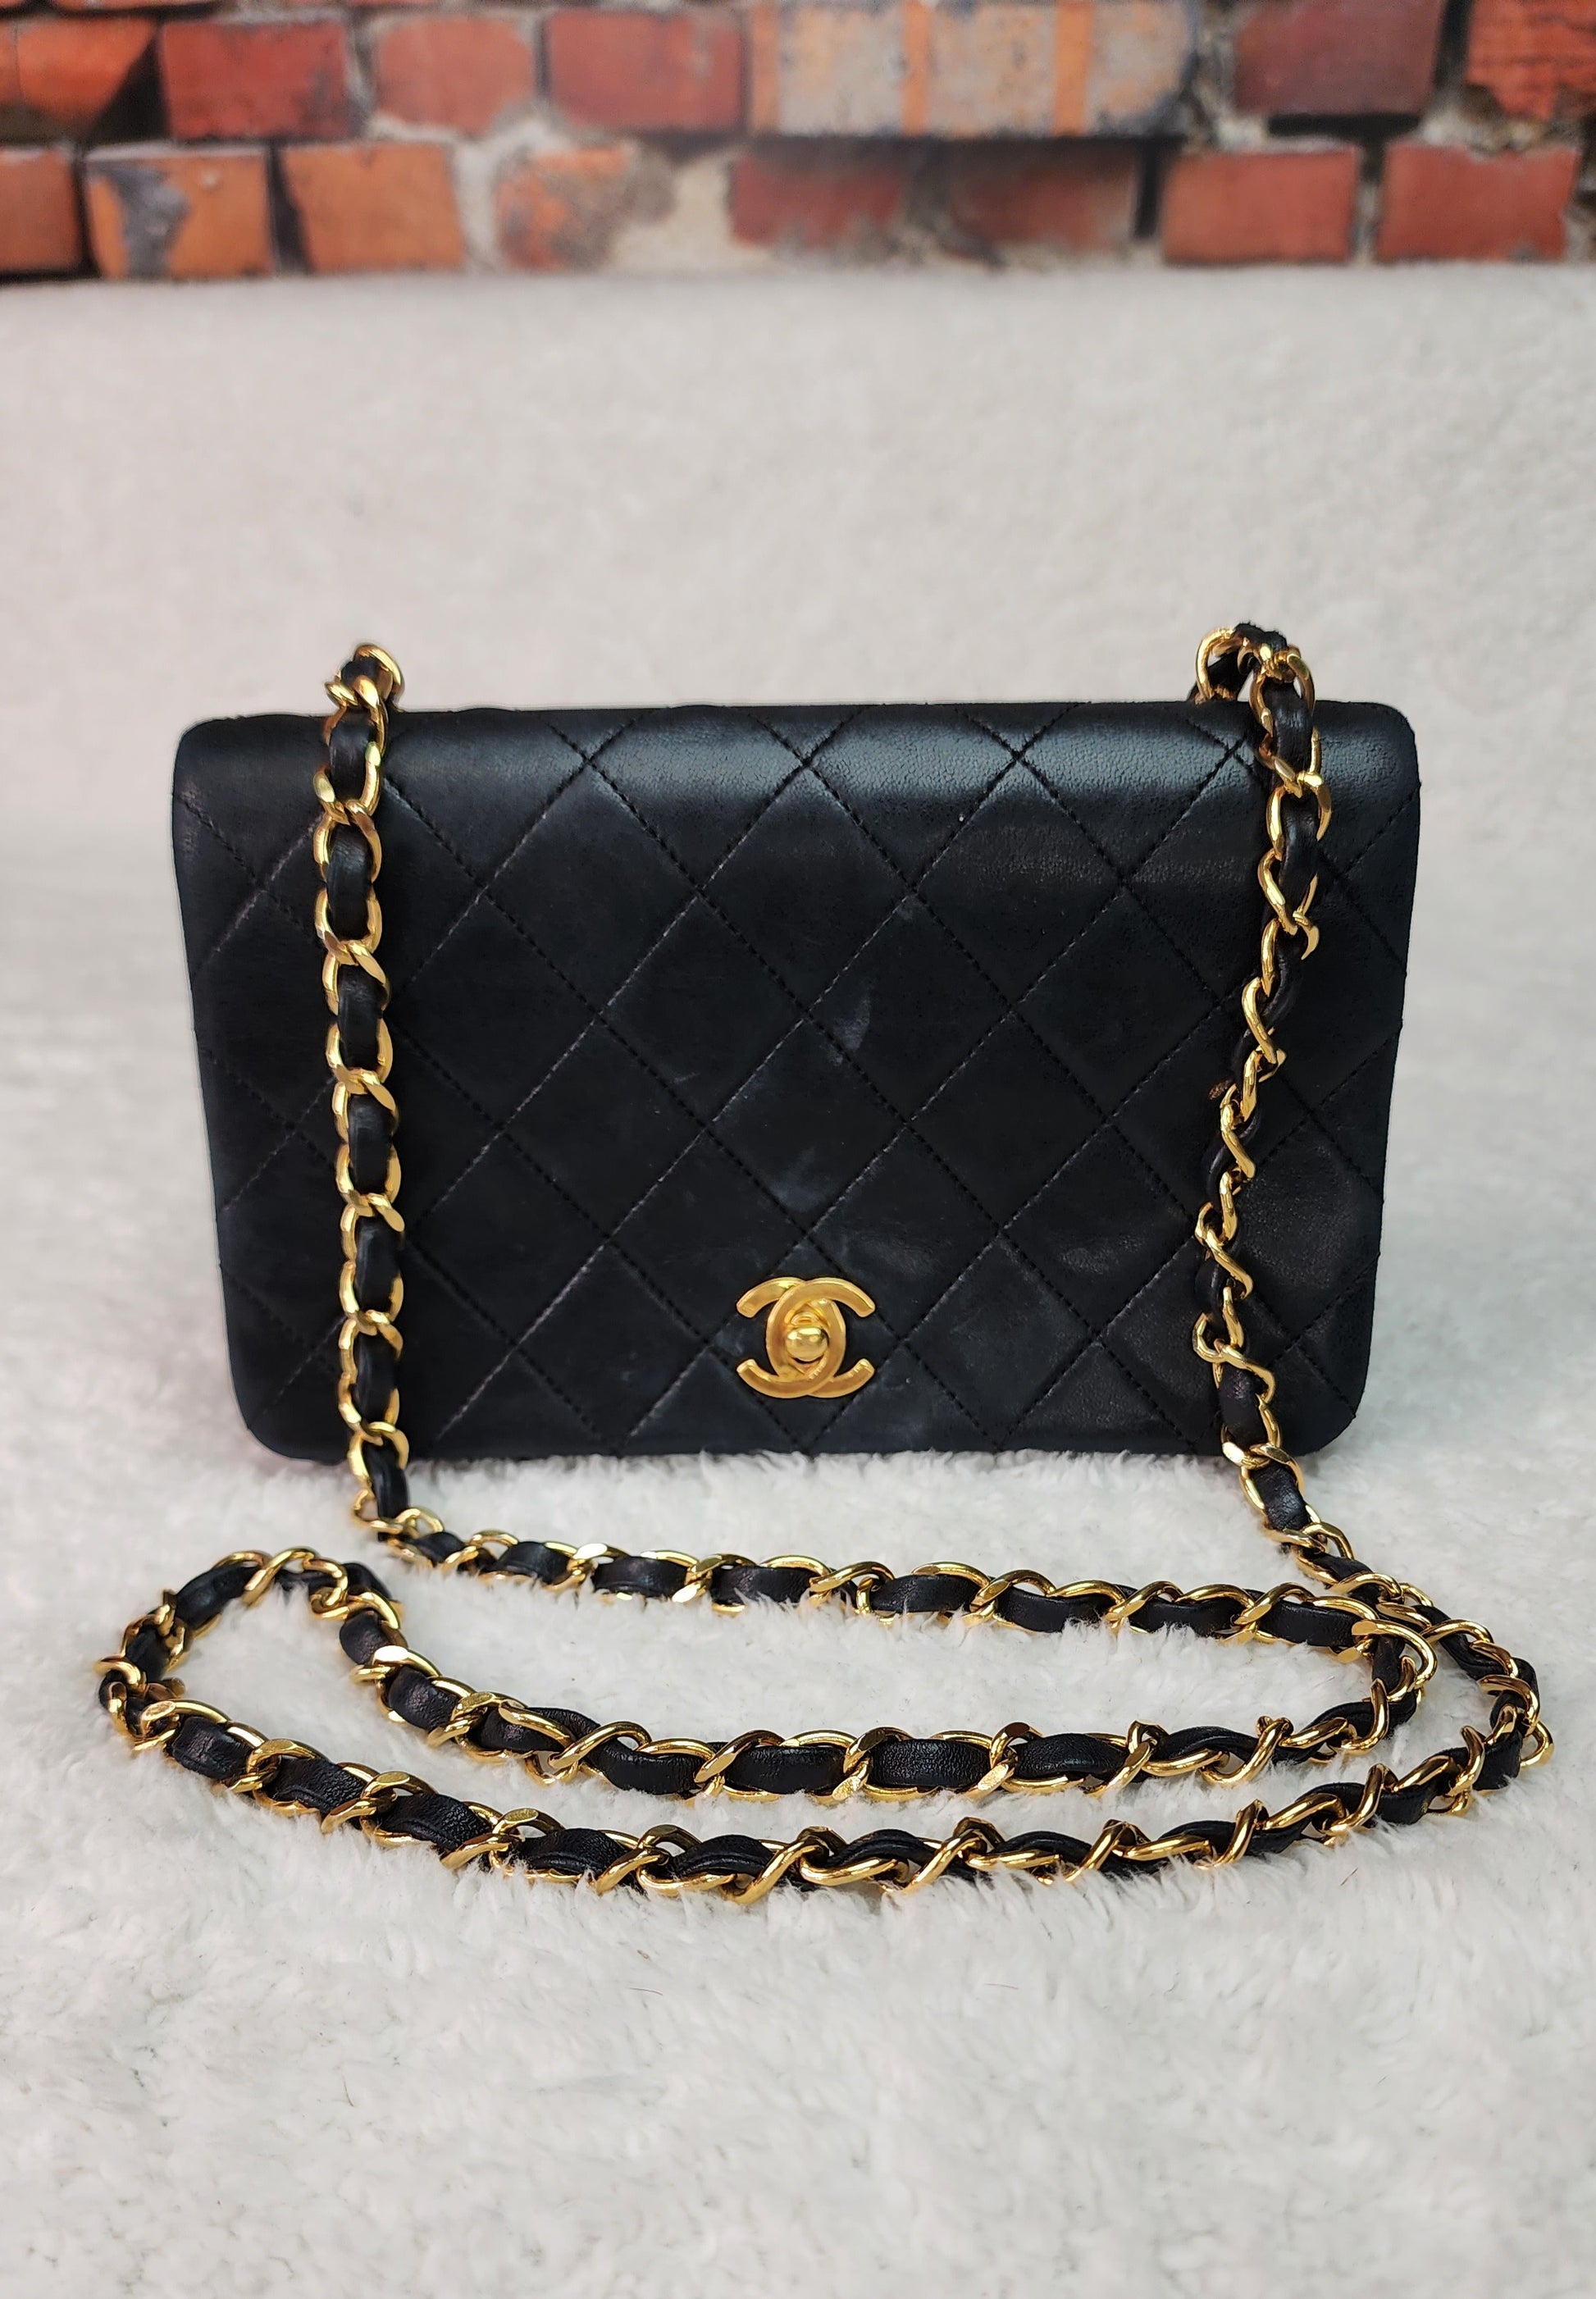 Classic Chanel flap bag large in caviar with gold finish authentic used